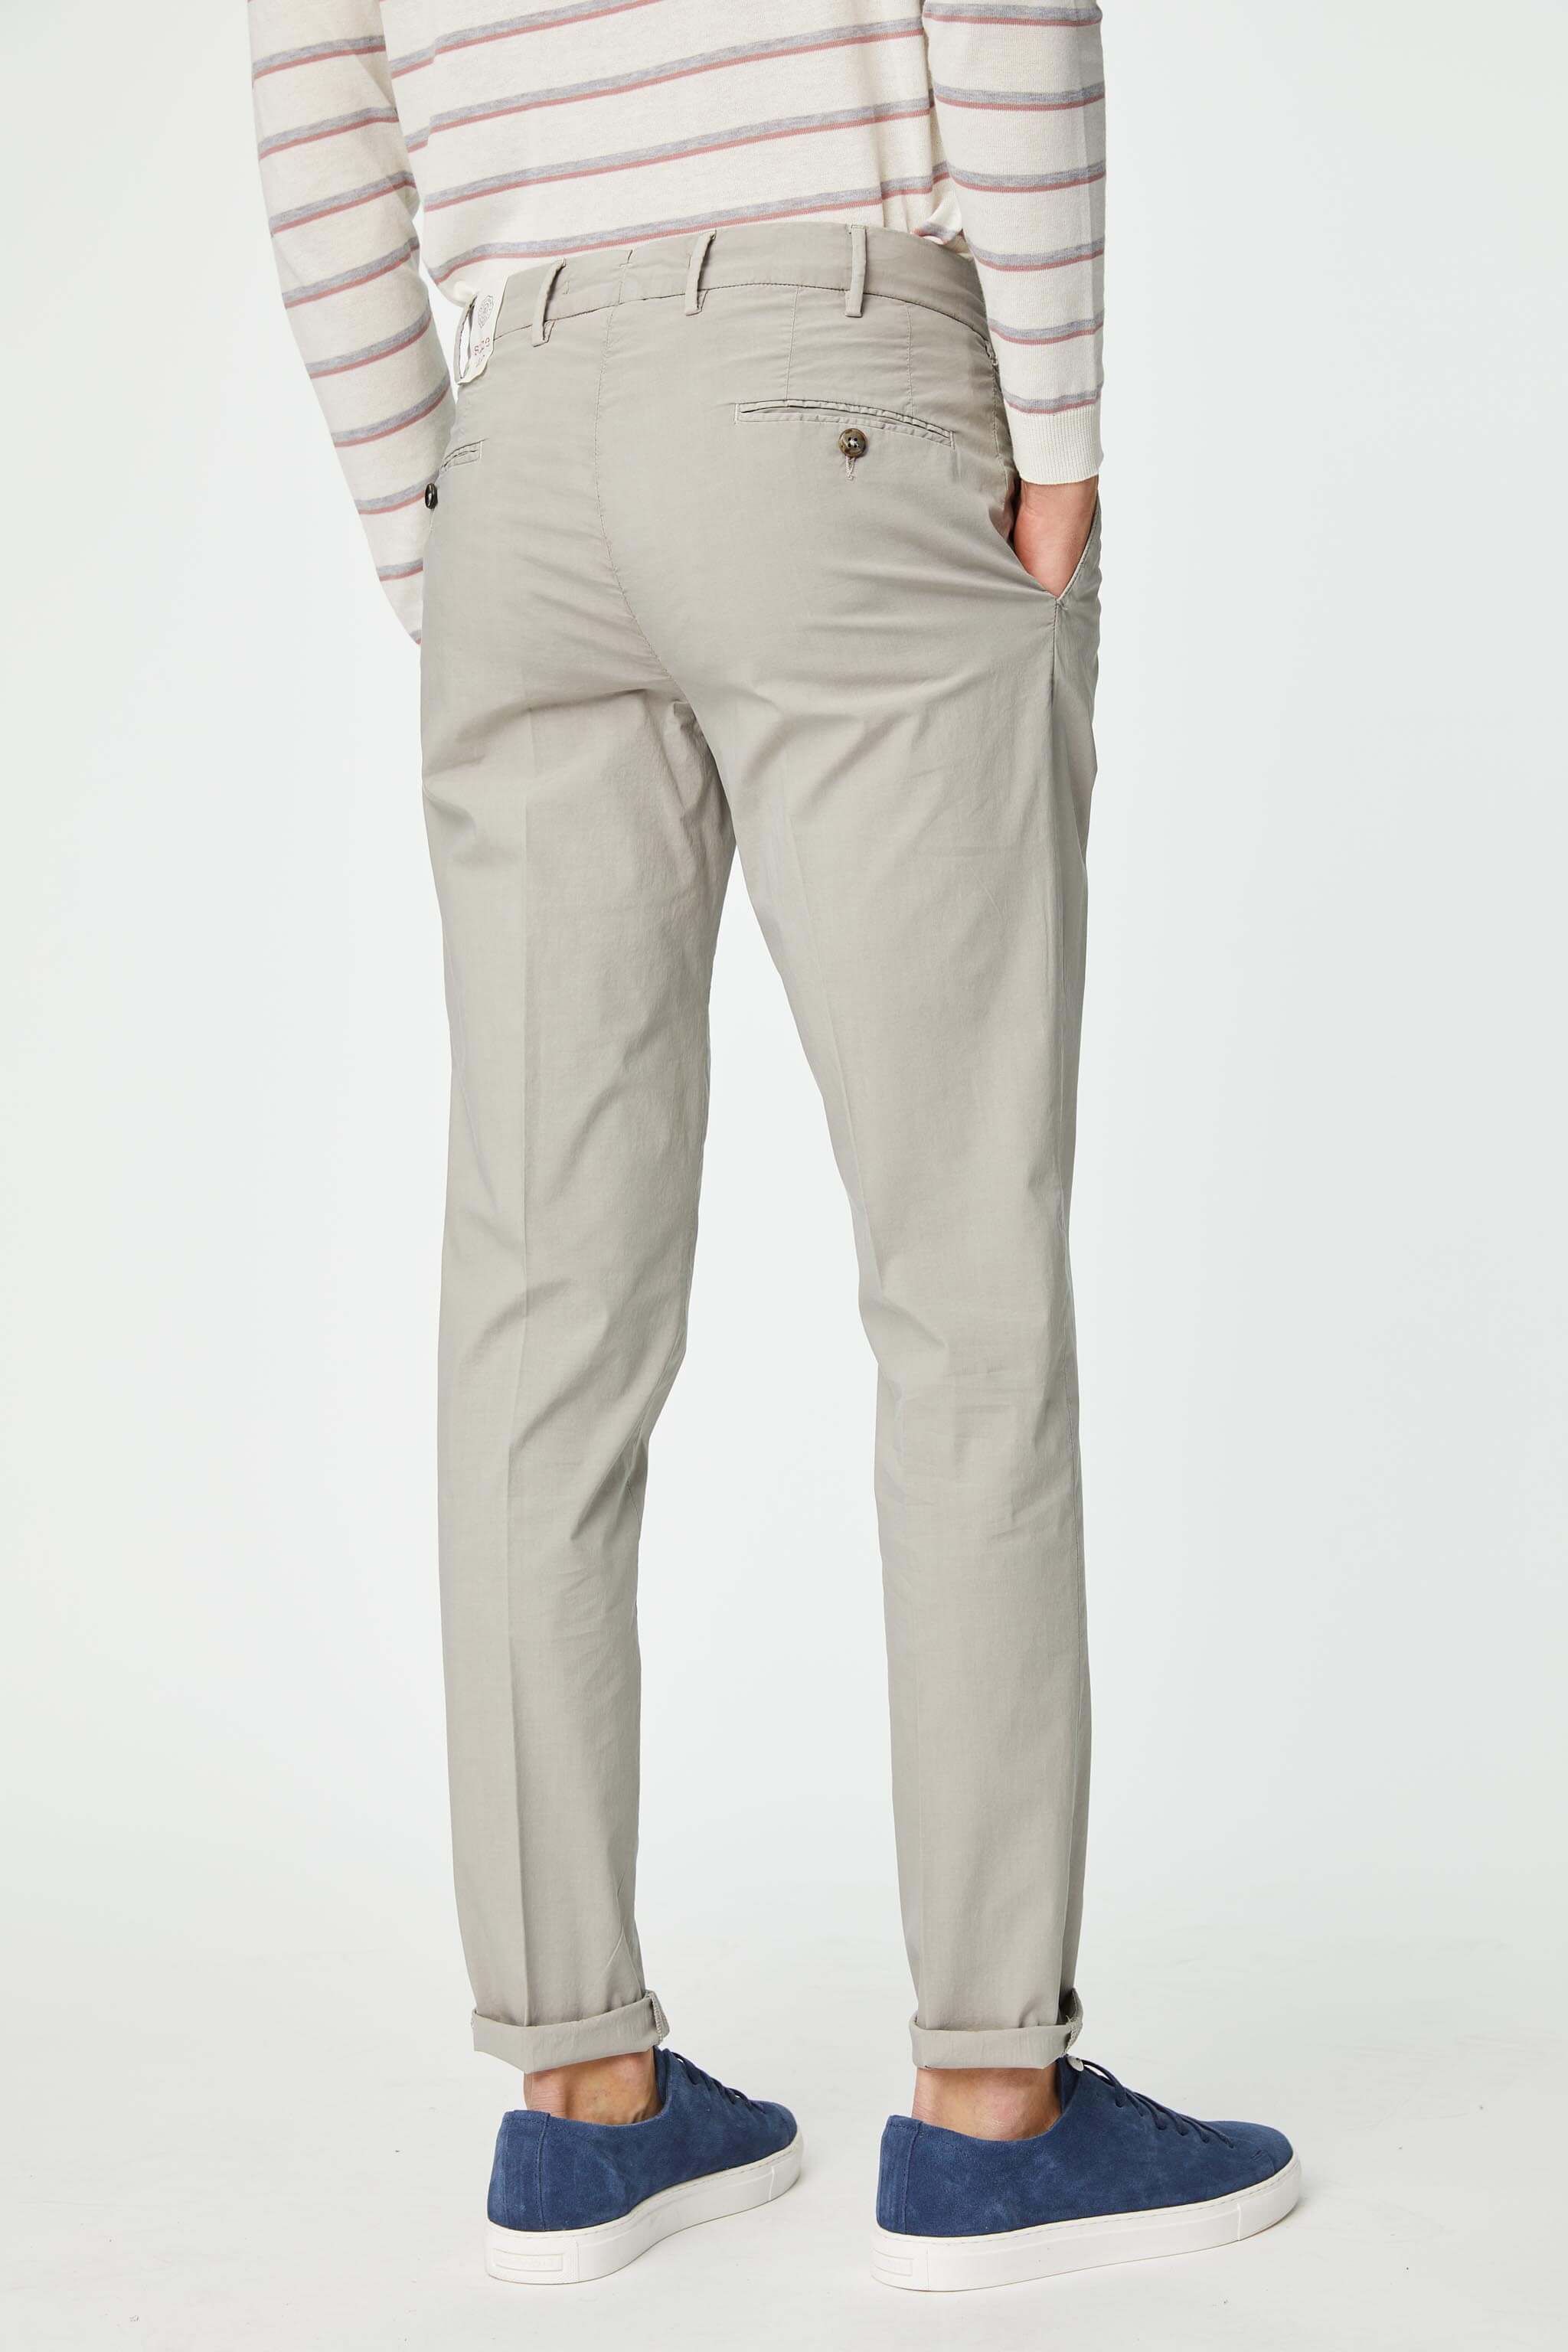 Garment-dyed MUDDY pants in gray